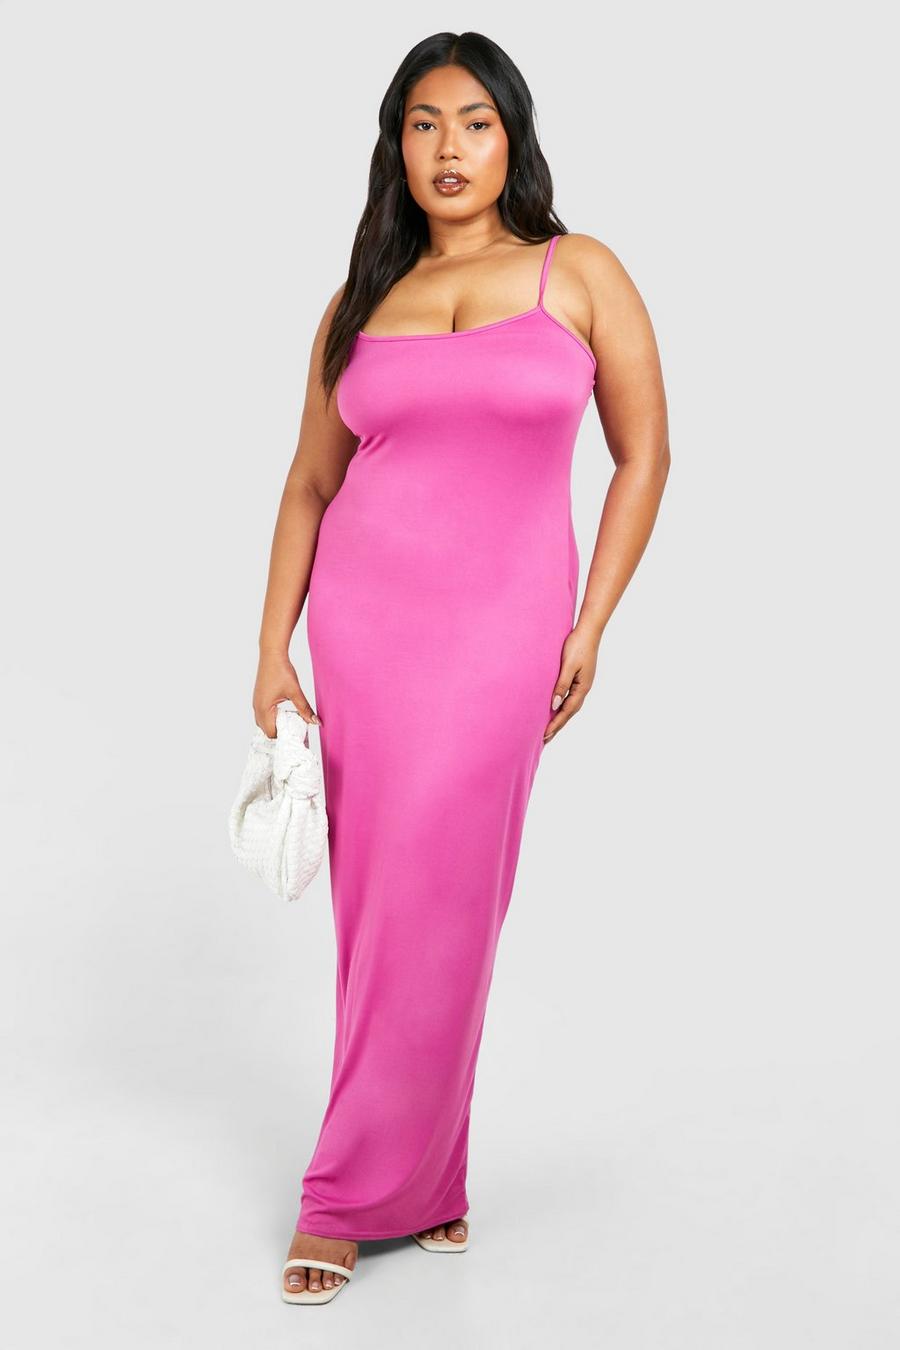 Grande taille - Robe longue à col rond, Hot pink